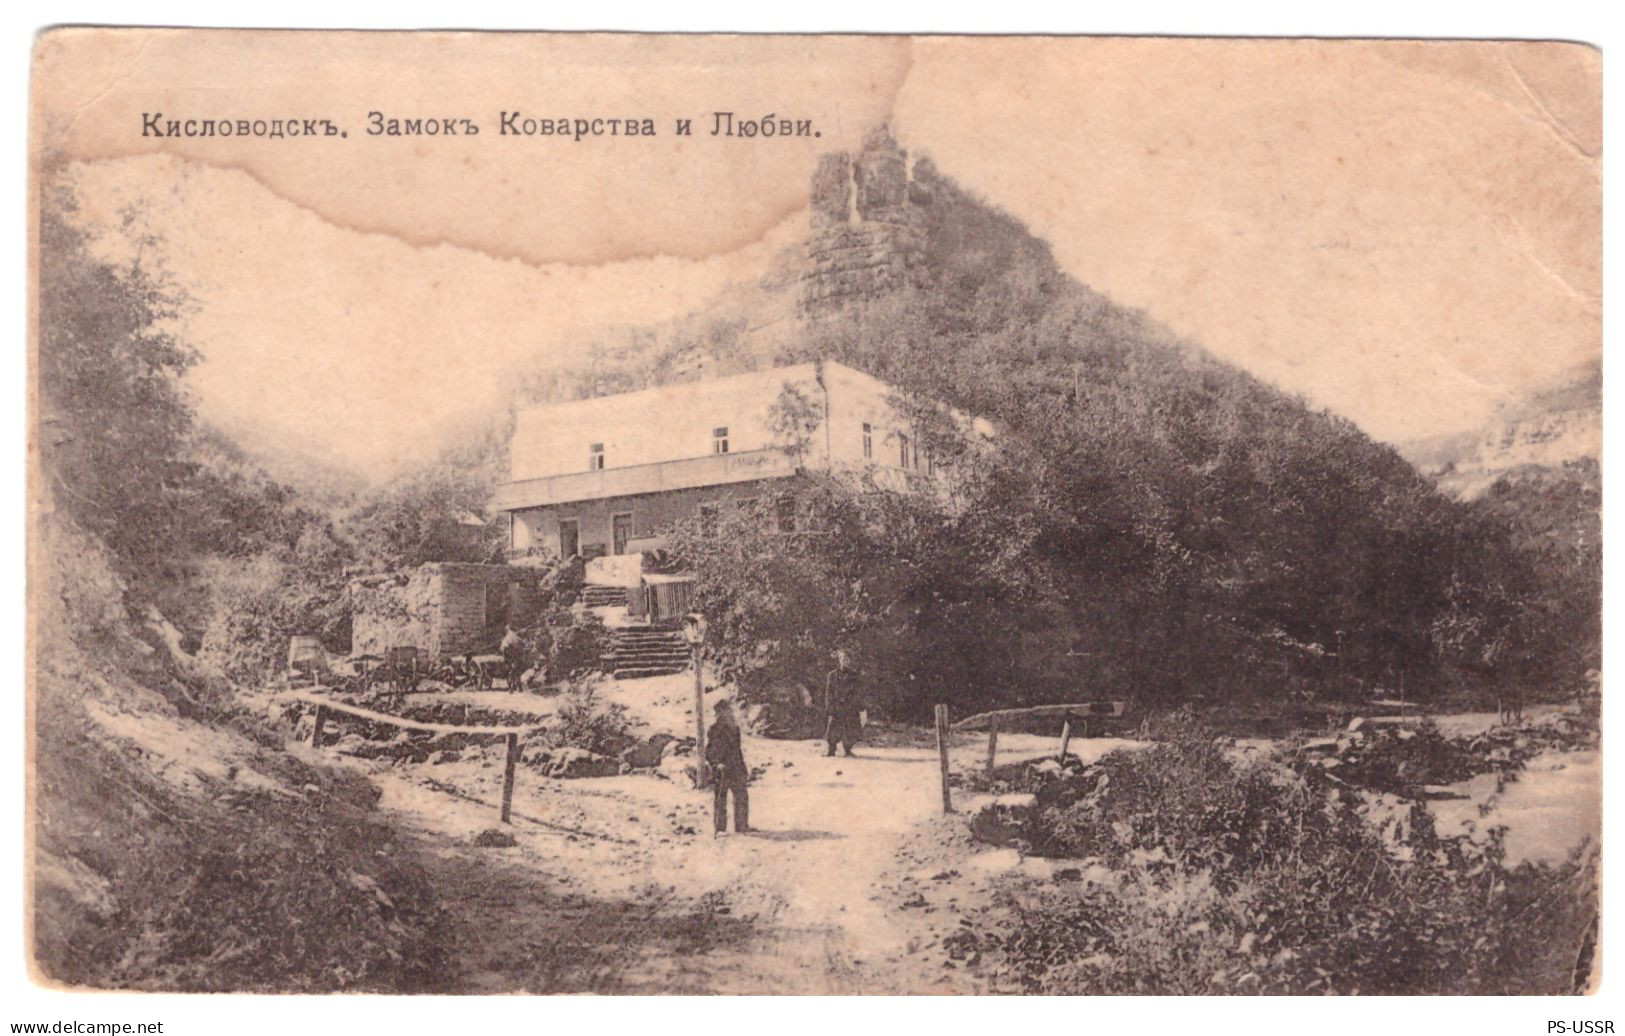 RUSSIA  Before 1940 KISLOVODSK CASTLE OF LOVE AND DECEIT POSTCARD UNUSED - Russland